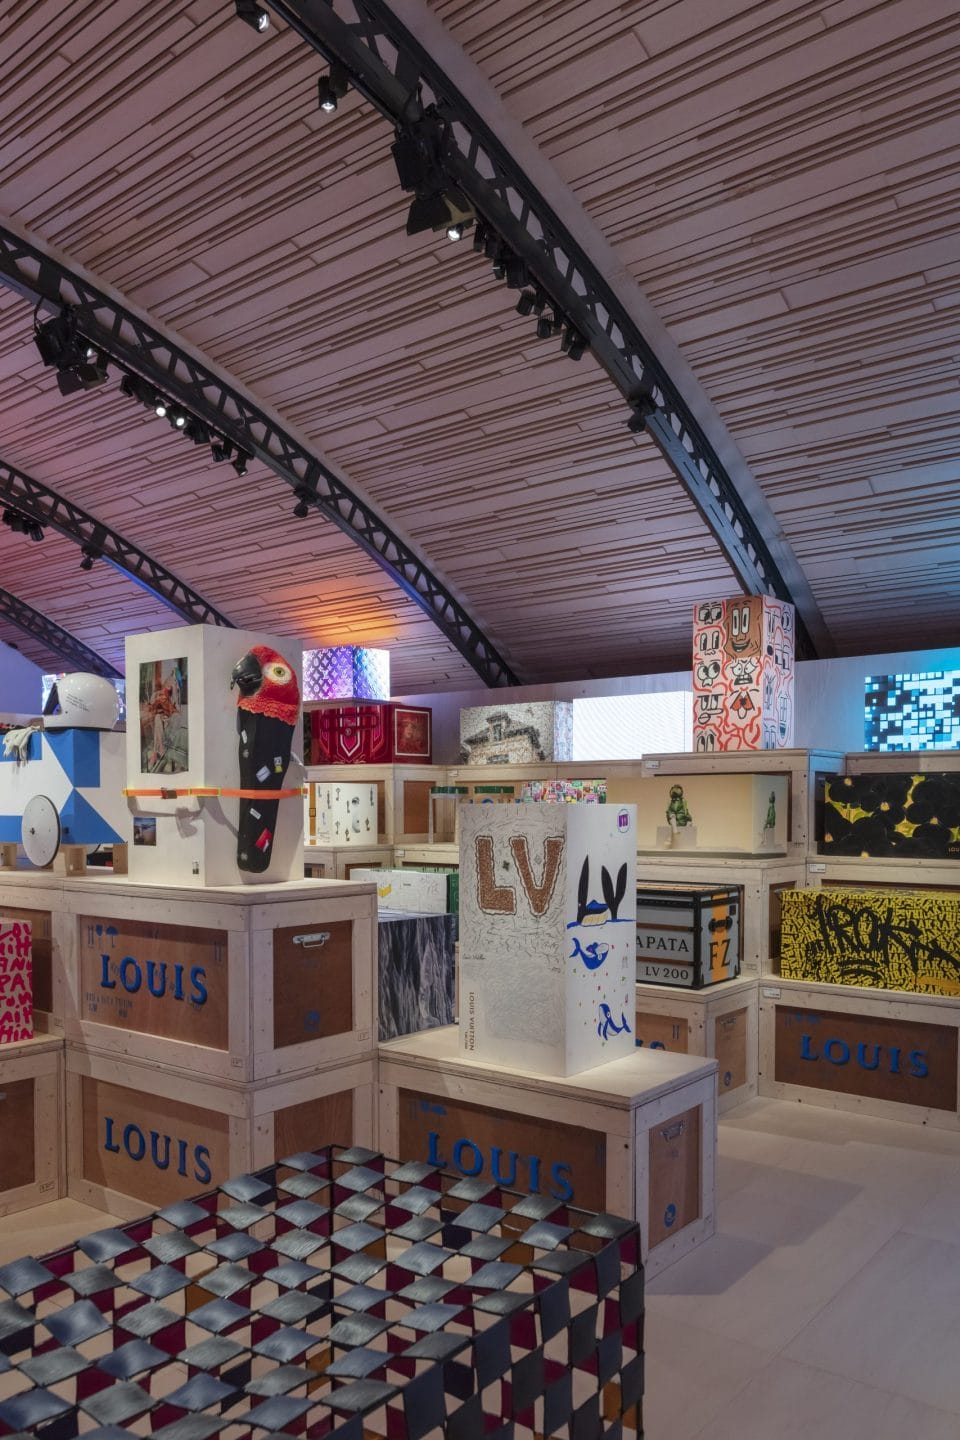 LV's 200th anniversary: “From brand to colossus while respecting